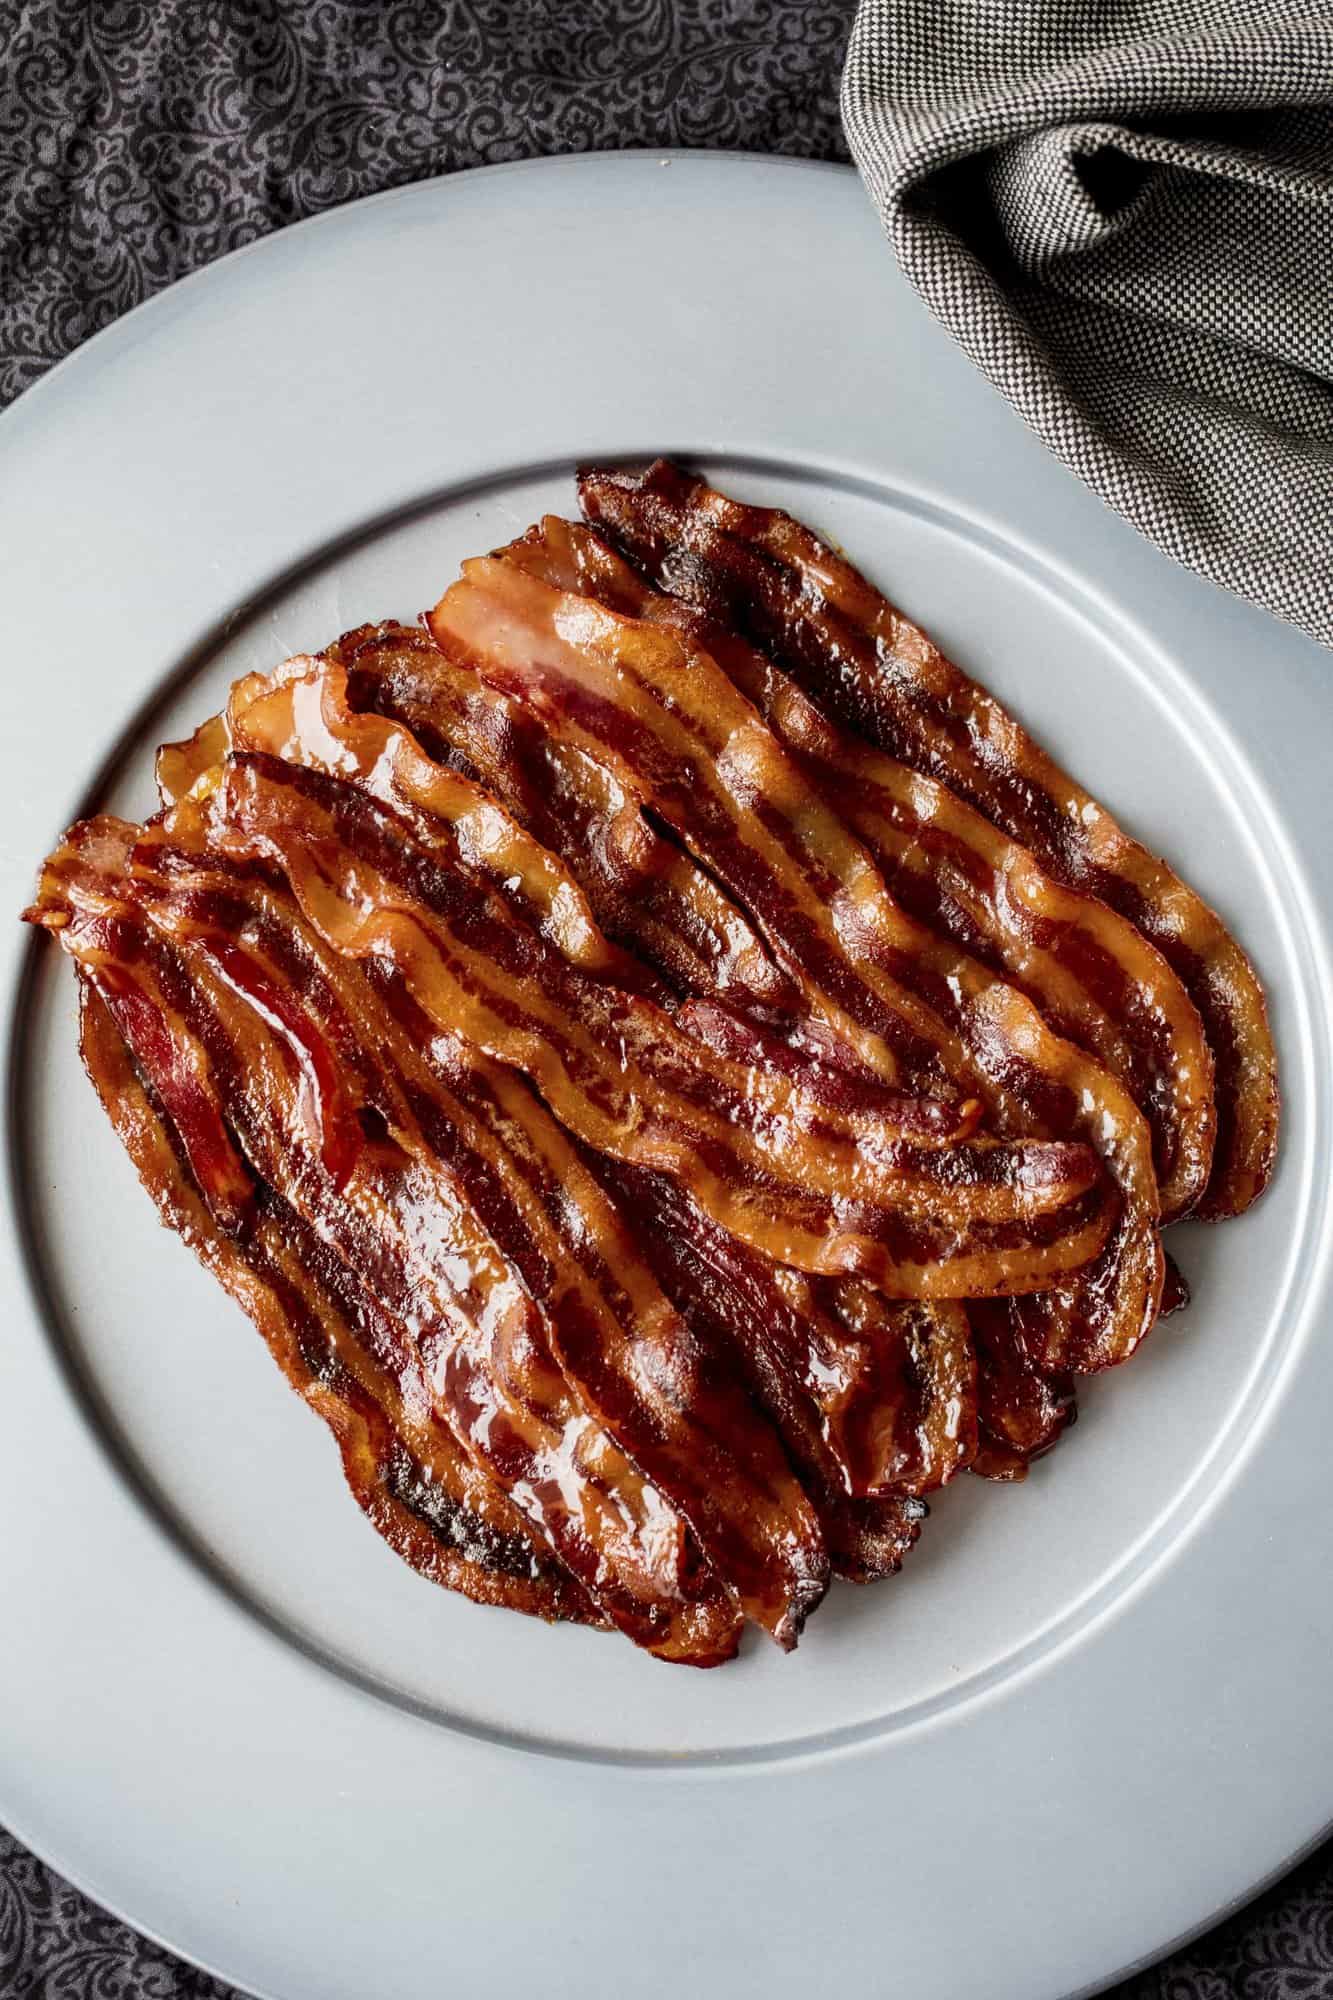 This Spicy Maple Candied Bacon takes glorious bacon and makes it even better. Use it in soups, salads, sandwiches, desserts and more!